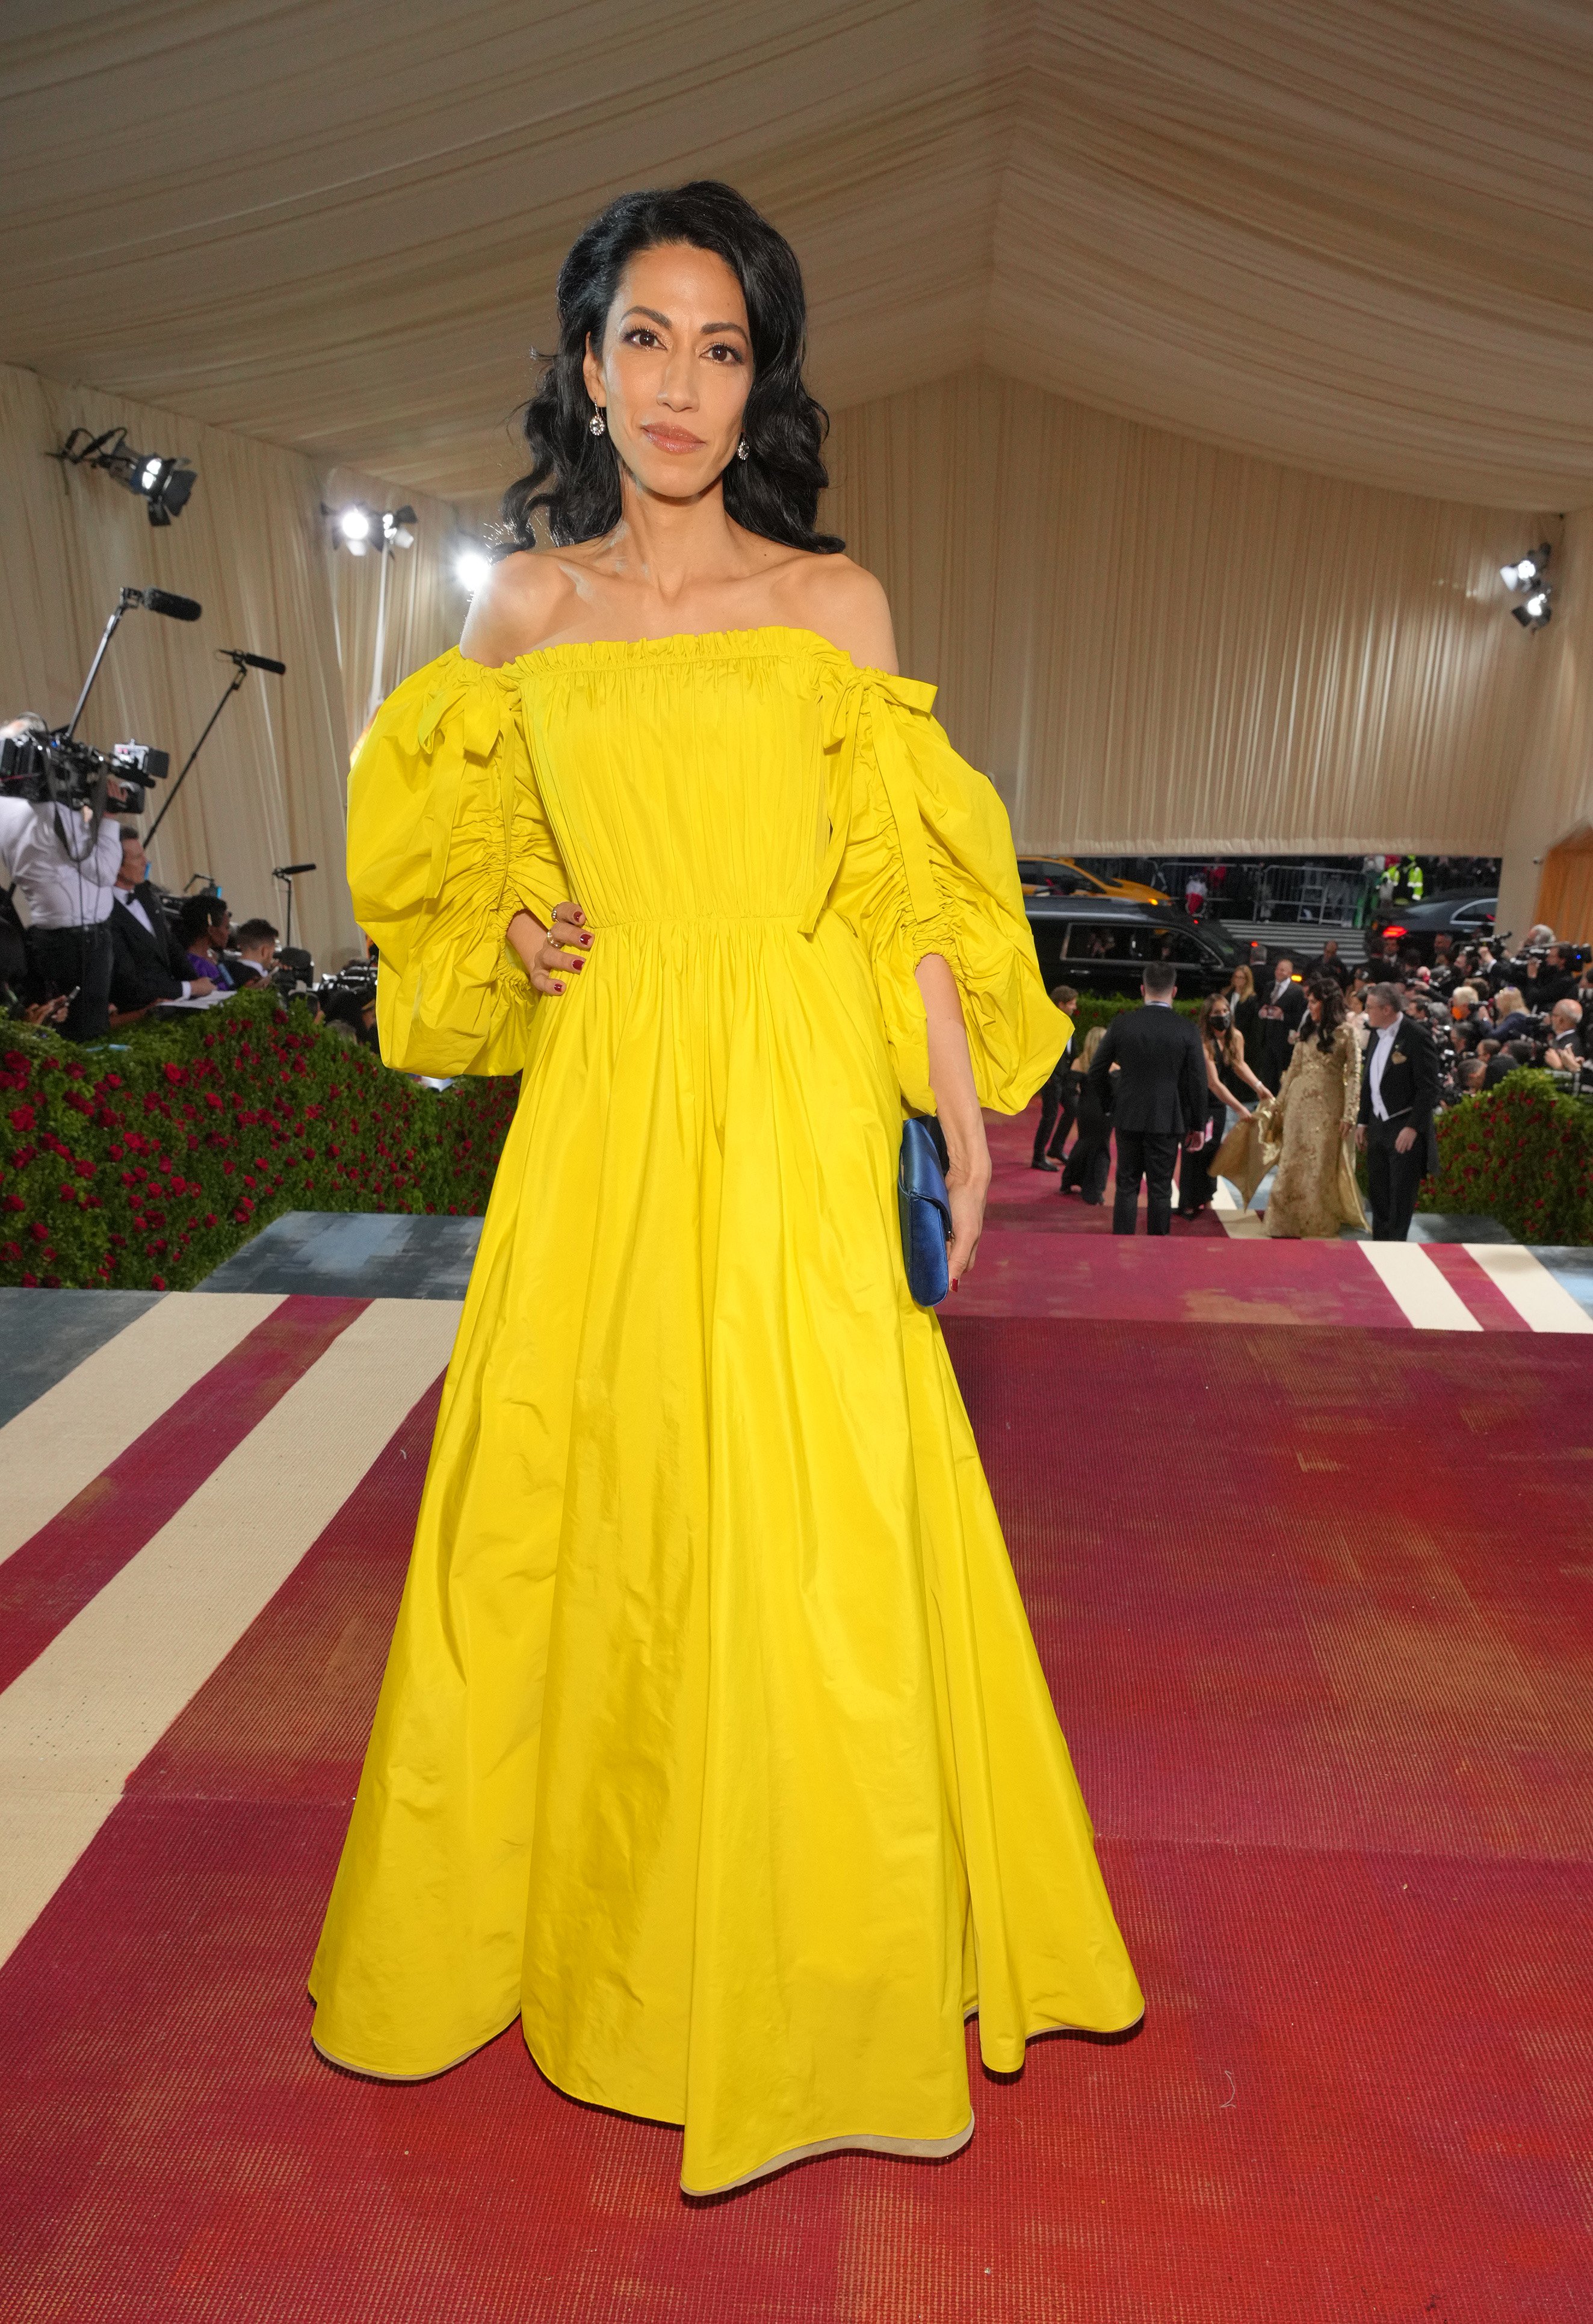 Huma Abedin arrives at The 2022 Met Gala Celebrating "In America: An Anthology of Fashion" at The Metropolitan Museum of Art on May 02, 2022 in New York City. | Source: Getty Images